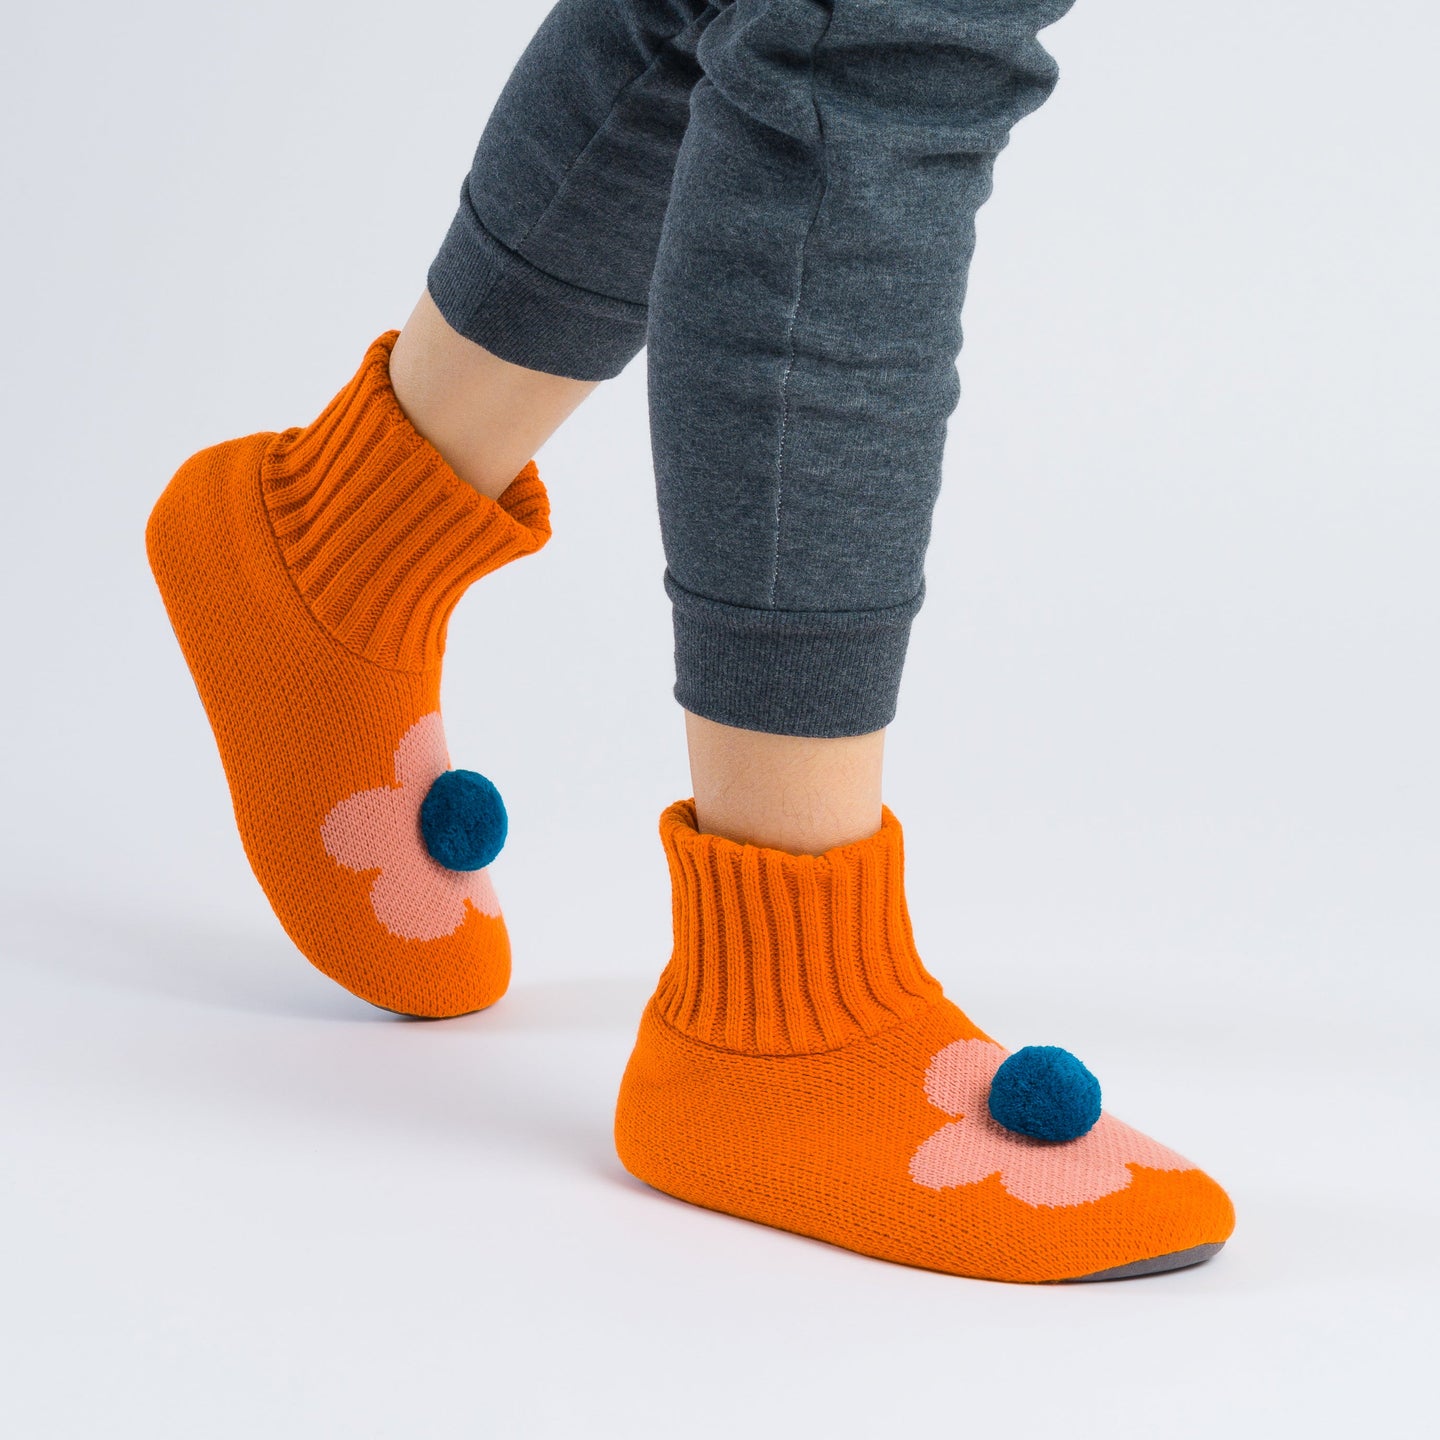 Orange non slip knit slippers with a pom on top walking